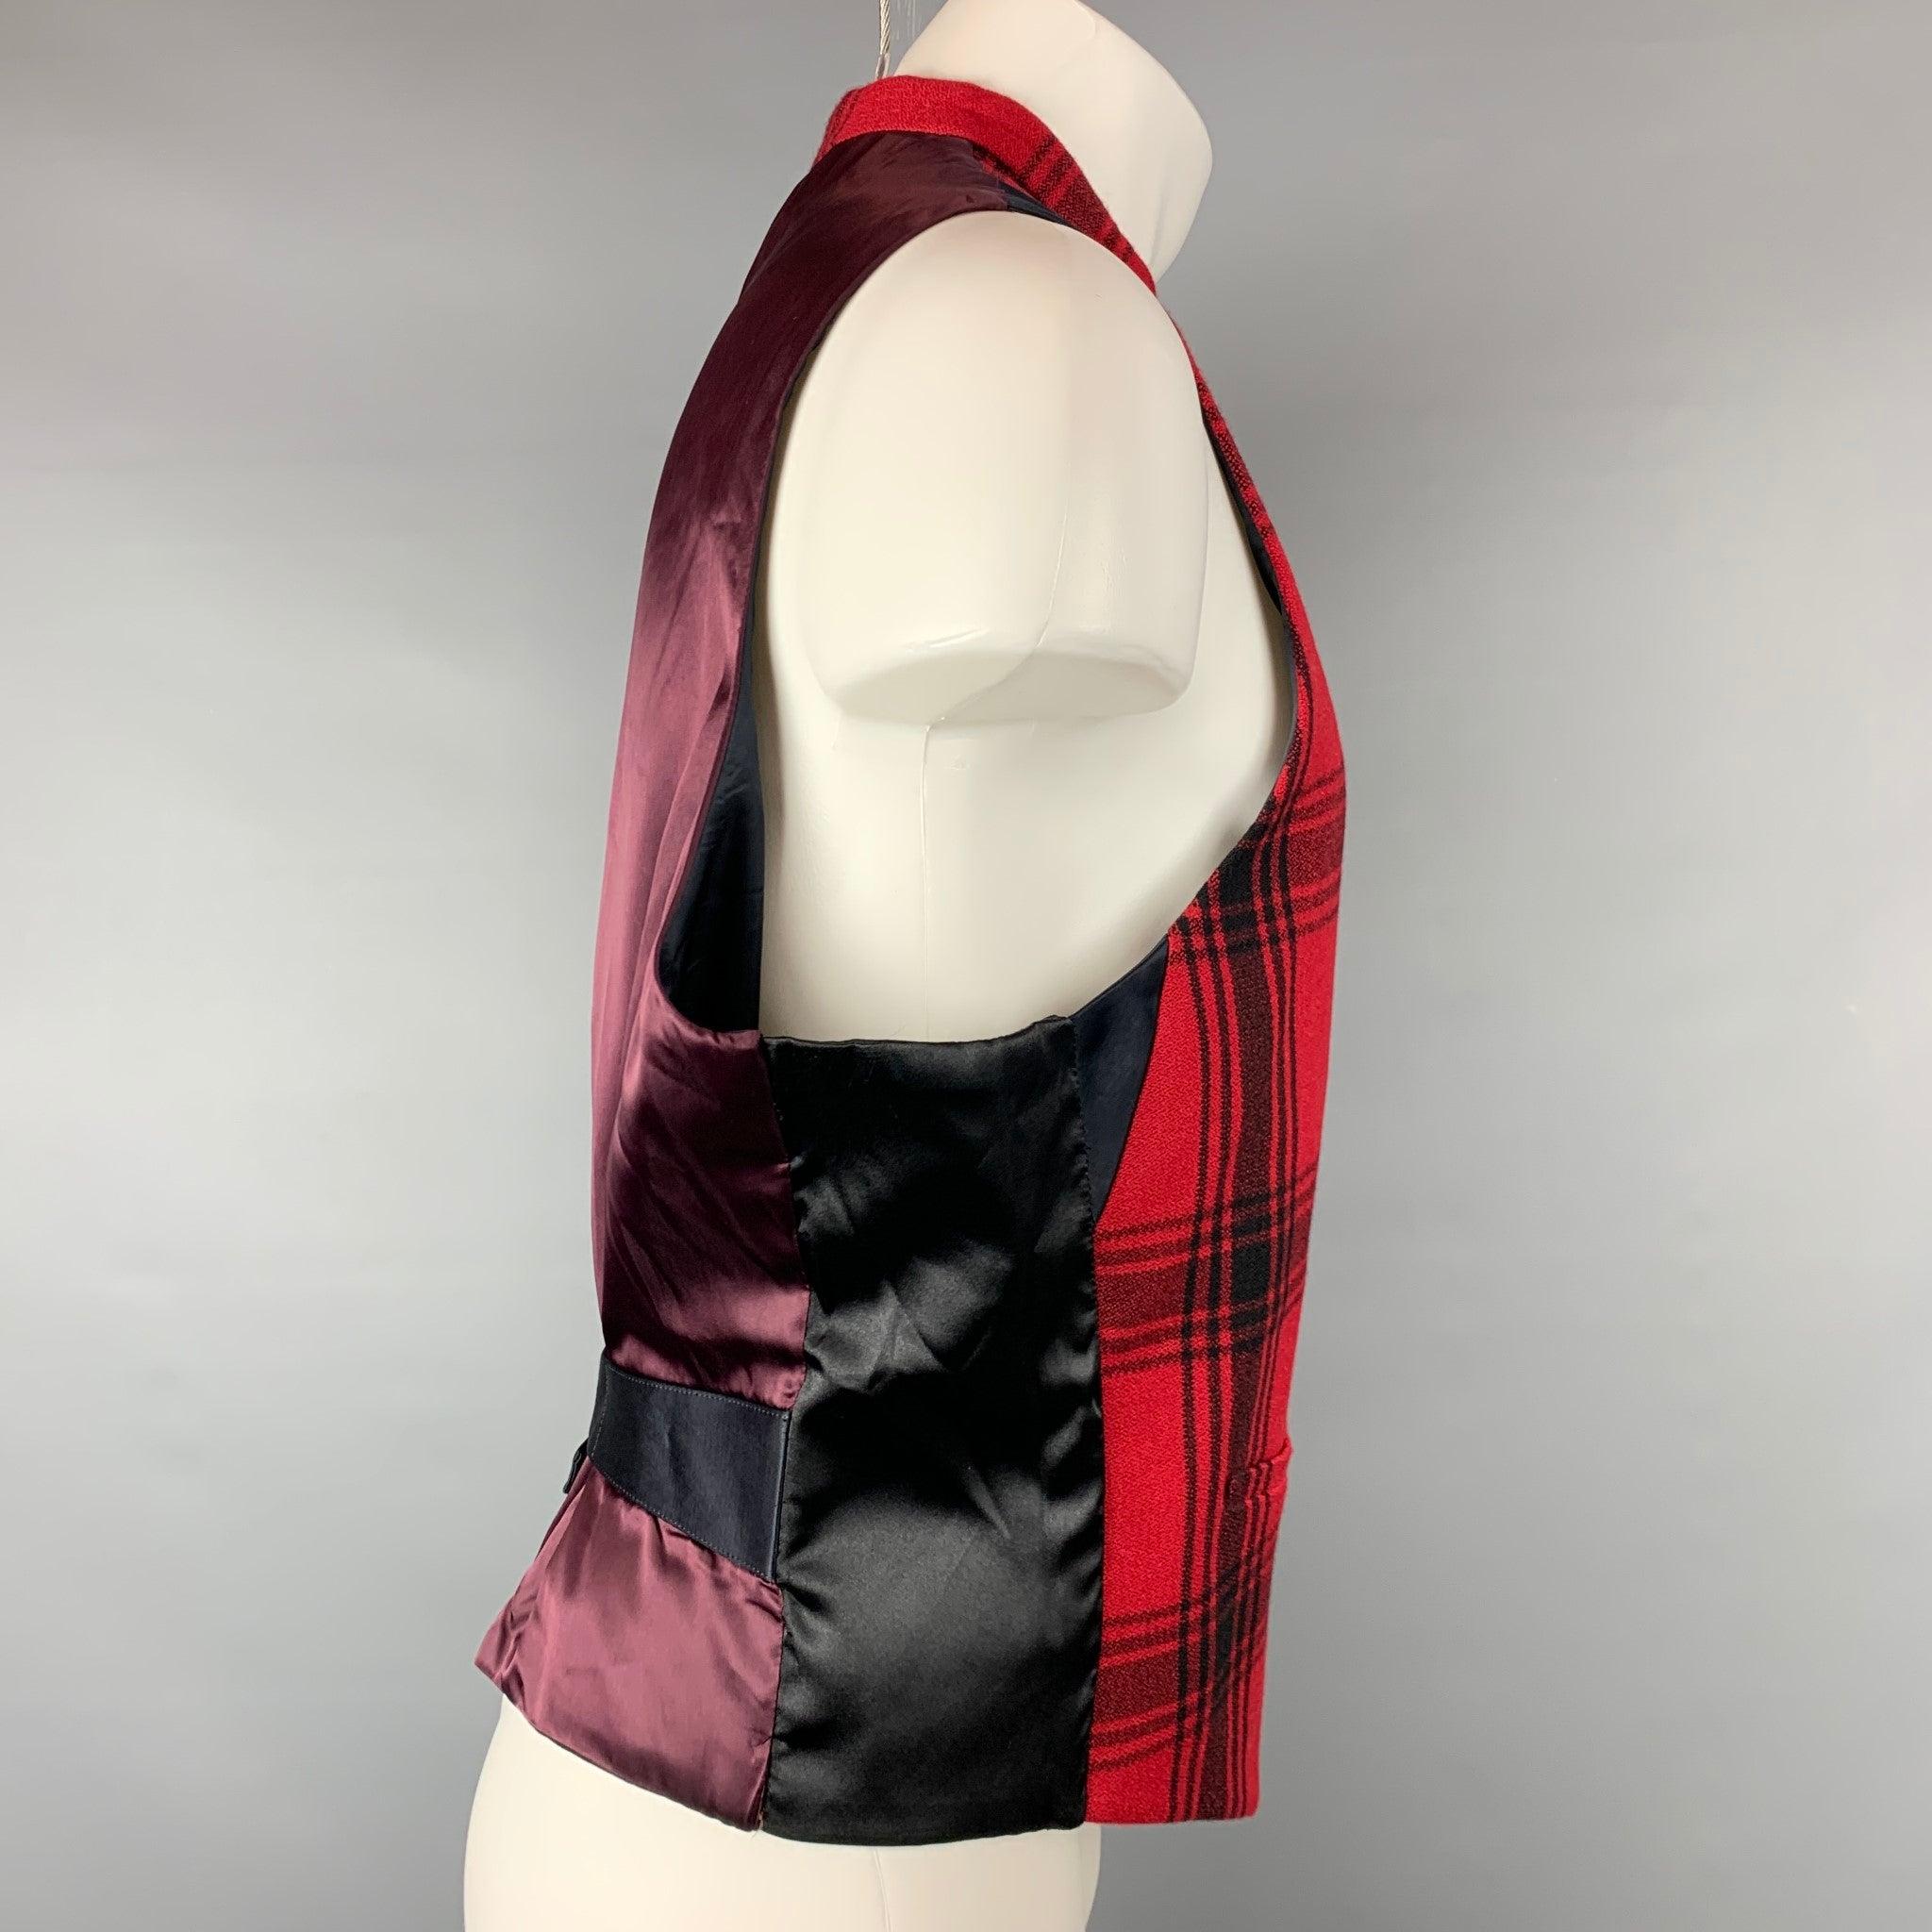 PAUL SMITH vest comes in a red & black plaid wool with a full liner featuring slit pockets, back belt, and a buttoned closure. Very Good Pre-Owned Condition. 

Marked:   XL 

Measurements: 
 
Shoulder: 14.5 inches  Chest: 46 inches  Length: 22.5